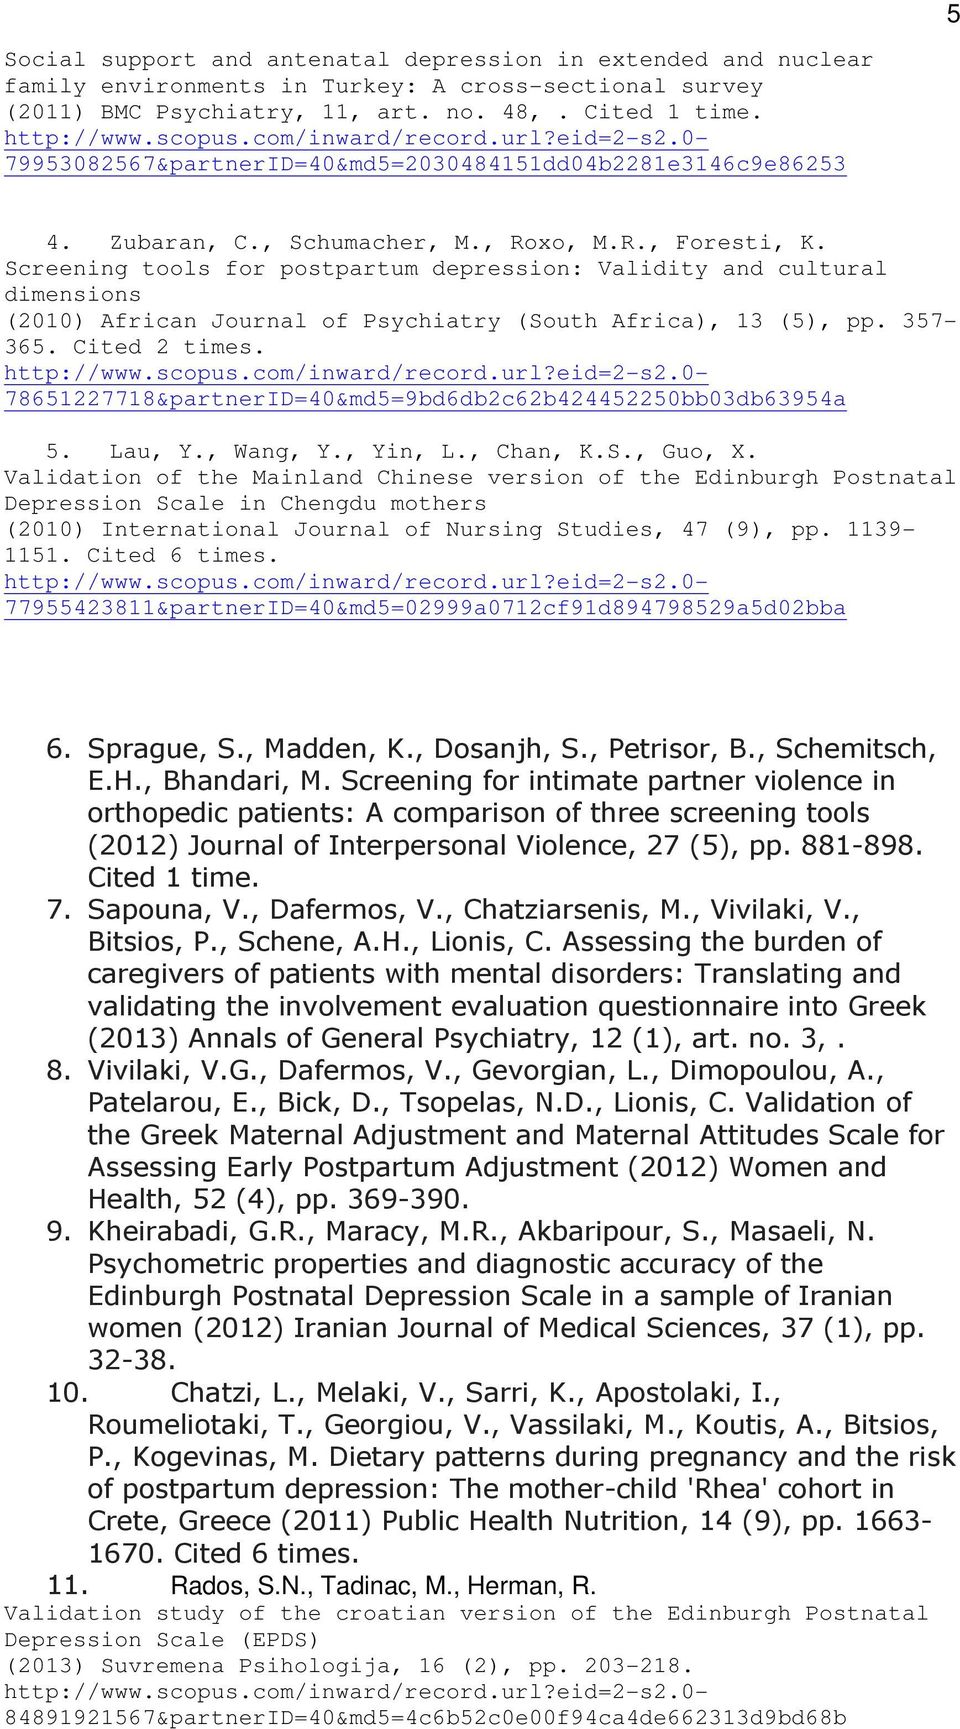 Screening tools for postpartum depression: Validity and cultural dimensions (2010) African Journal of Psychiatry (South Africa), 13 (5), pp. 357-365. Cited 2 times. http://www.scopus.